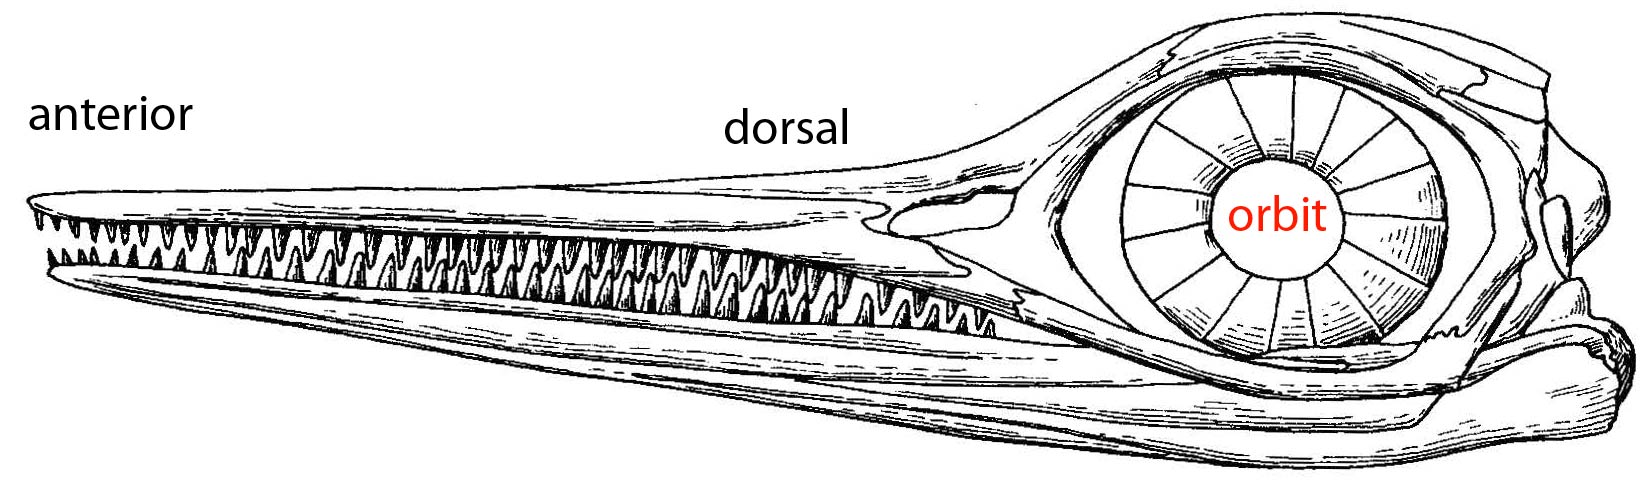 Ophthalmosaurus from McGowan and Motani (2003)